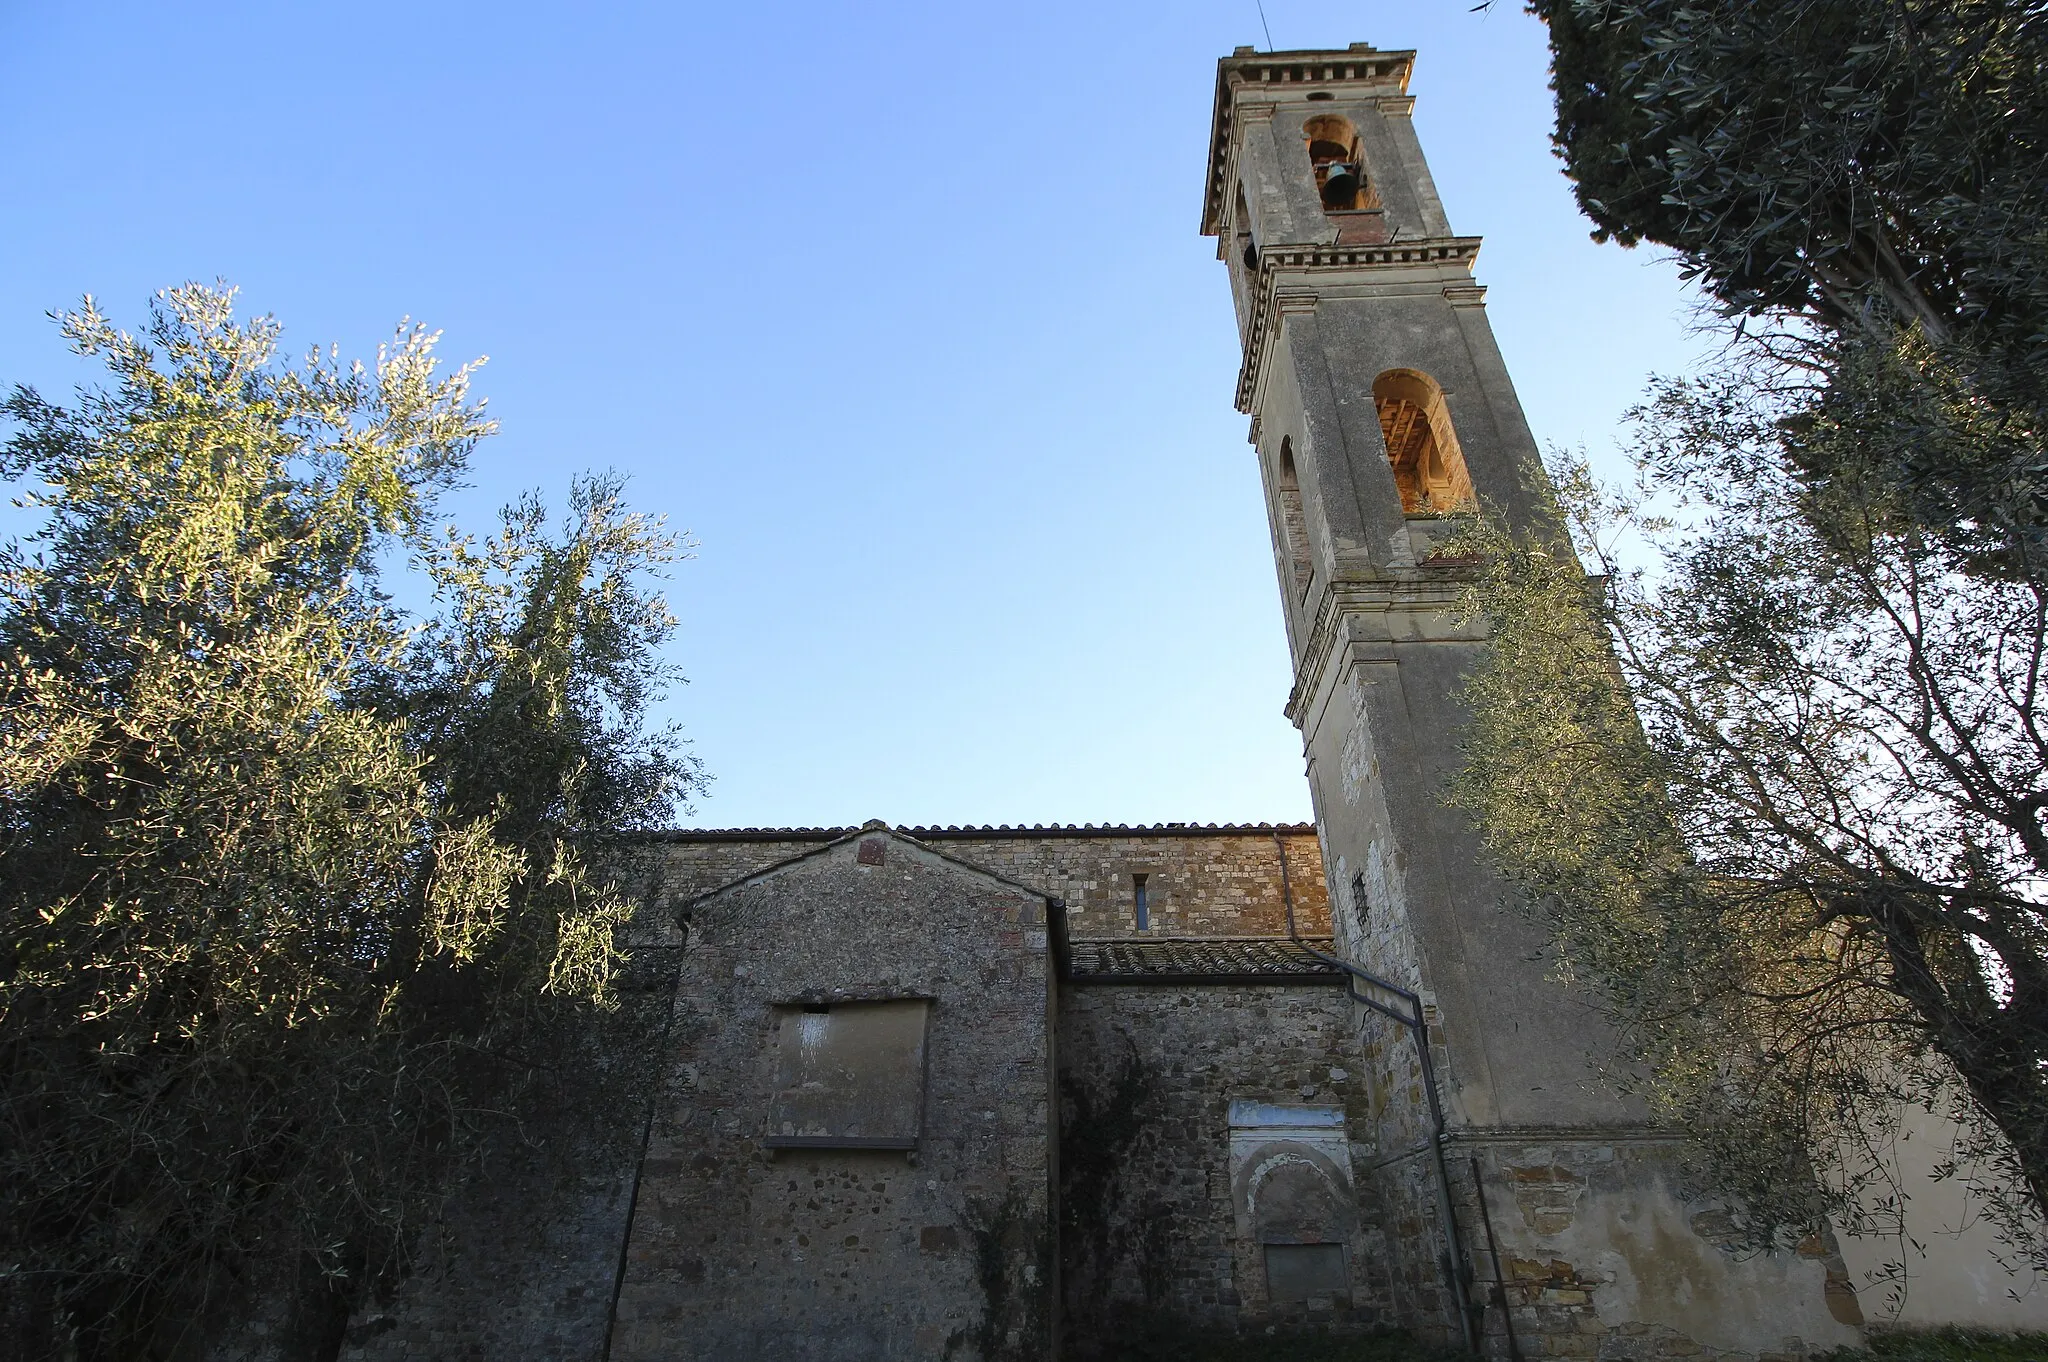 Photo showing: Church (Pieve) San Pietro in Bossolo, Tavarnelle Val di Pesa, Comune in the Metropolitan City of Florence, Tuscany, Italy